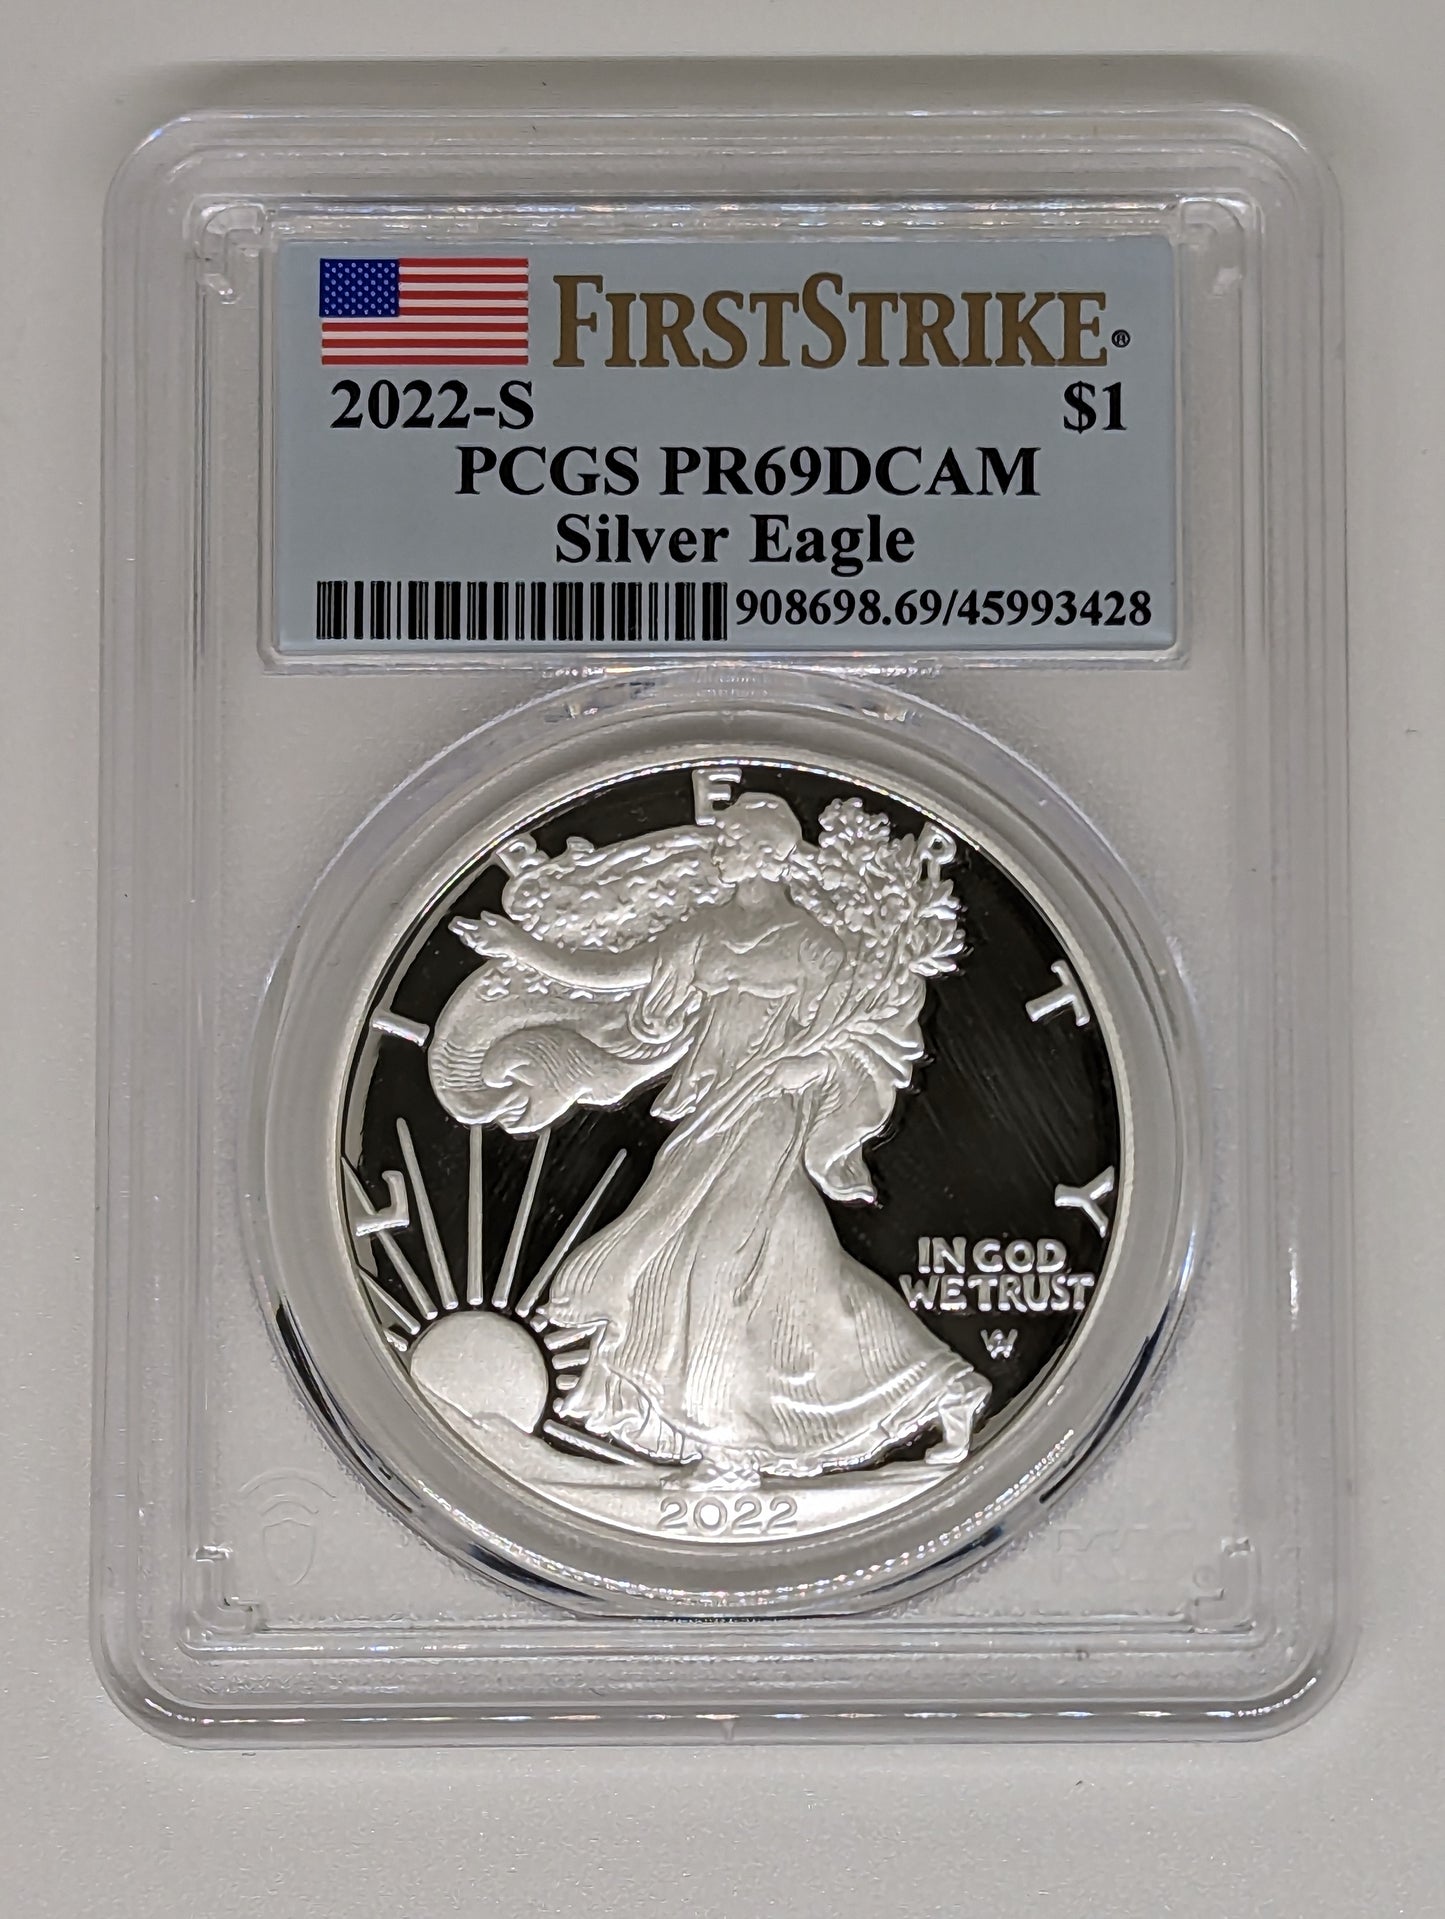 2022-S $1 American Eagle 1 oz. Silver Proof Coin - PR69 - First Strike